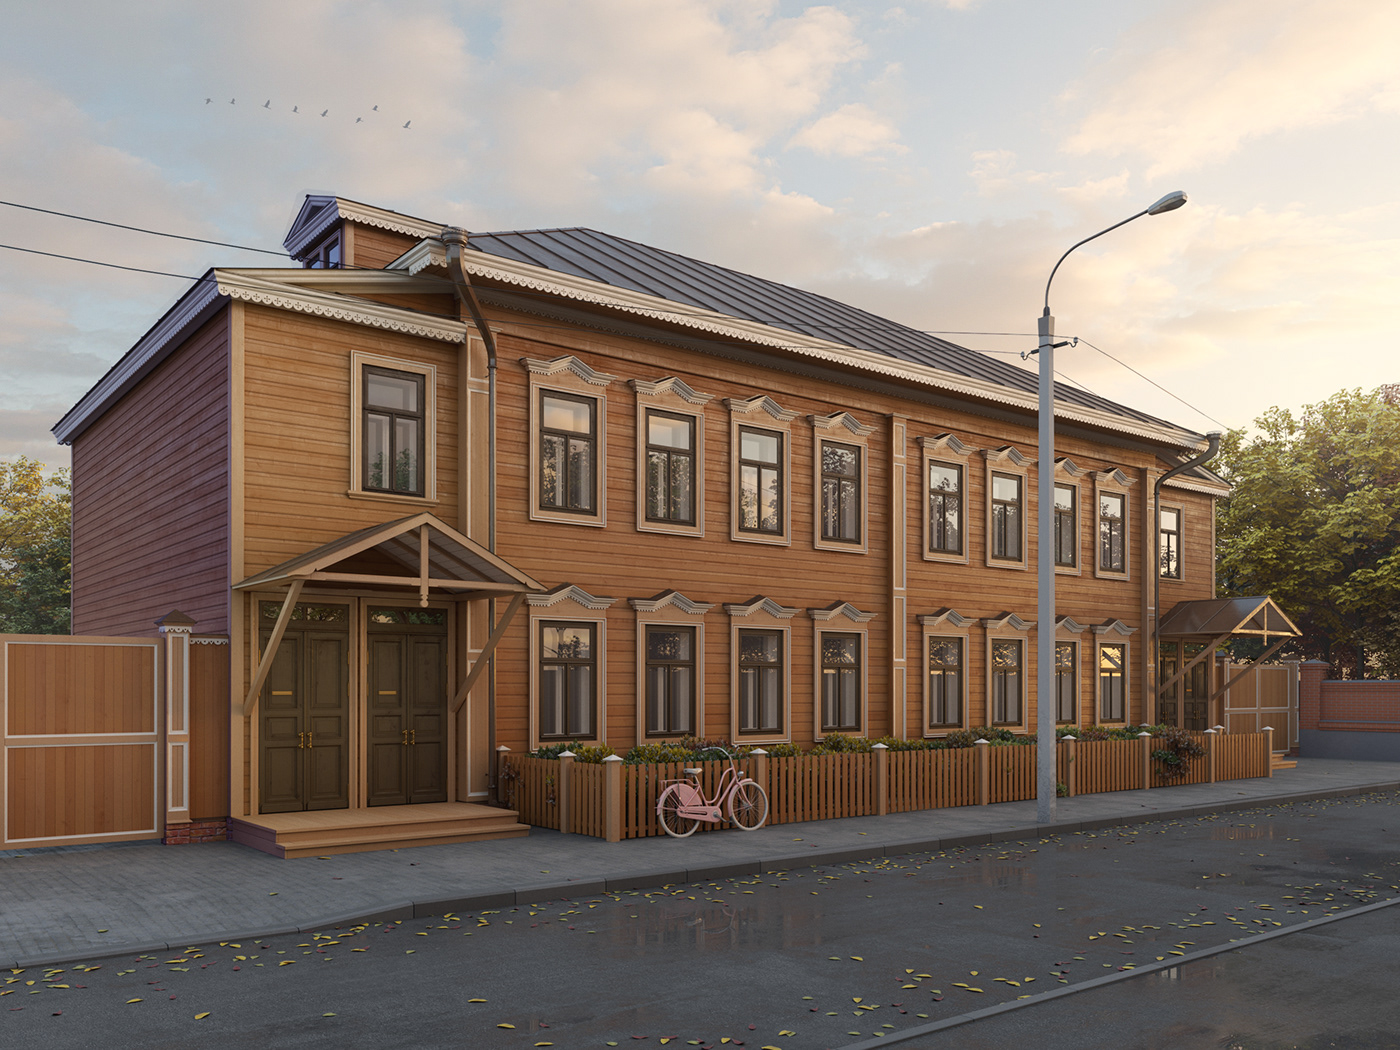 reconstruction re-creation historical building Render architecture visualization